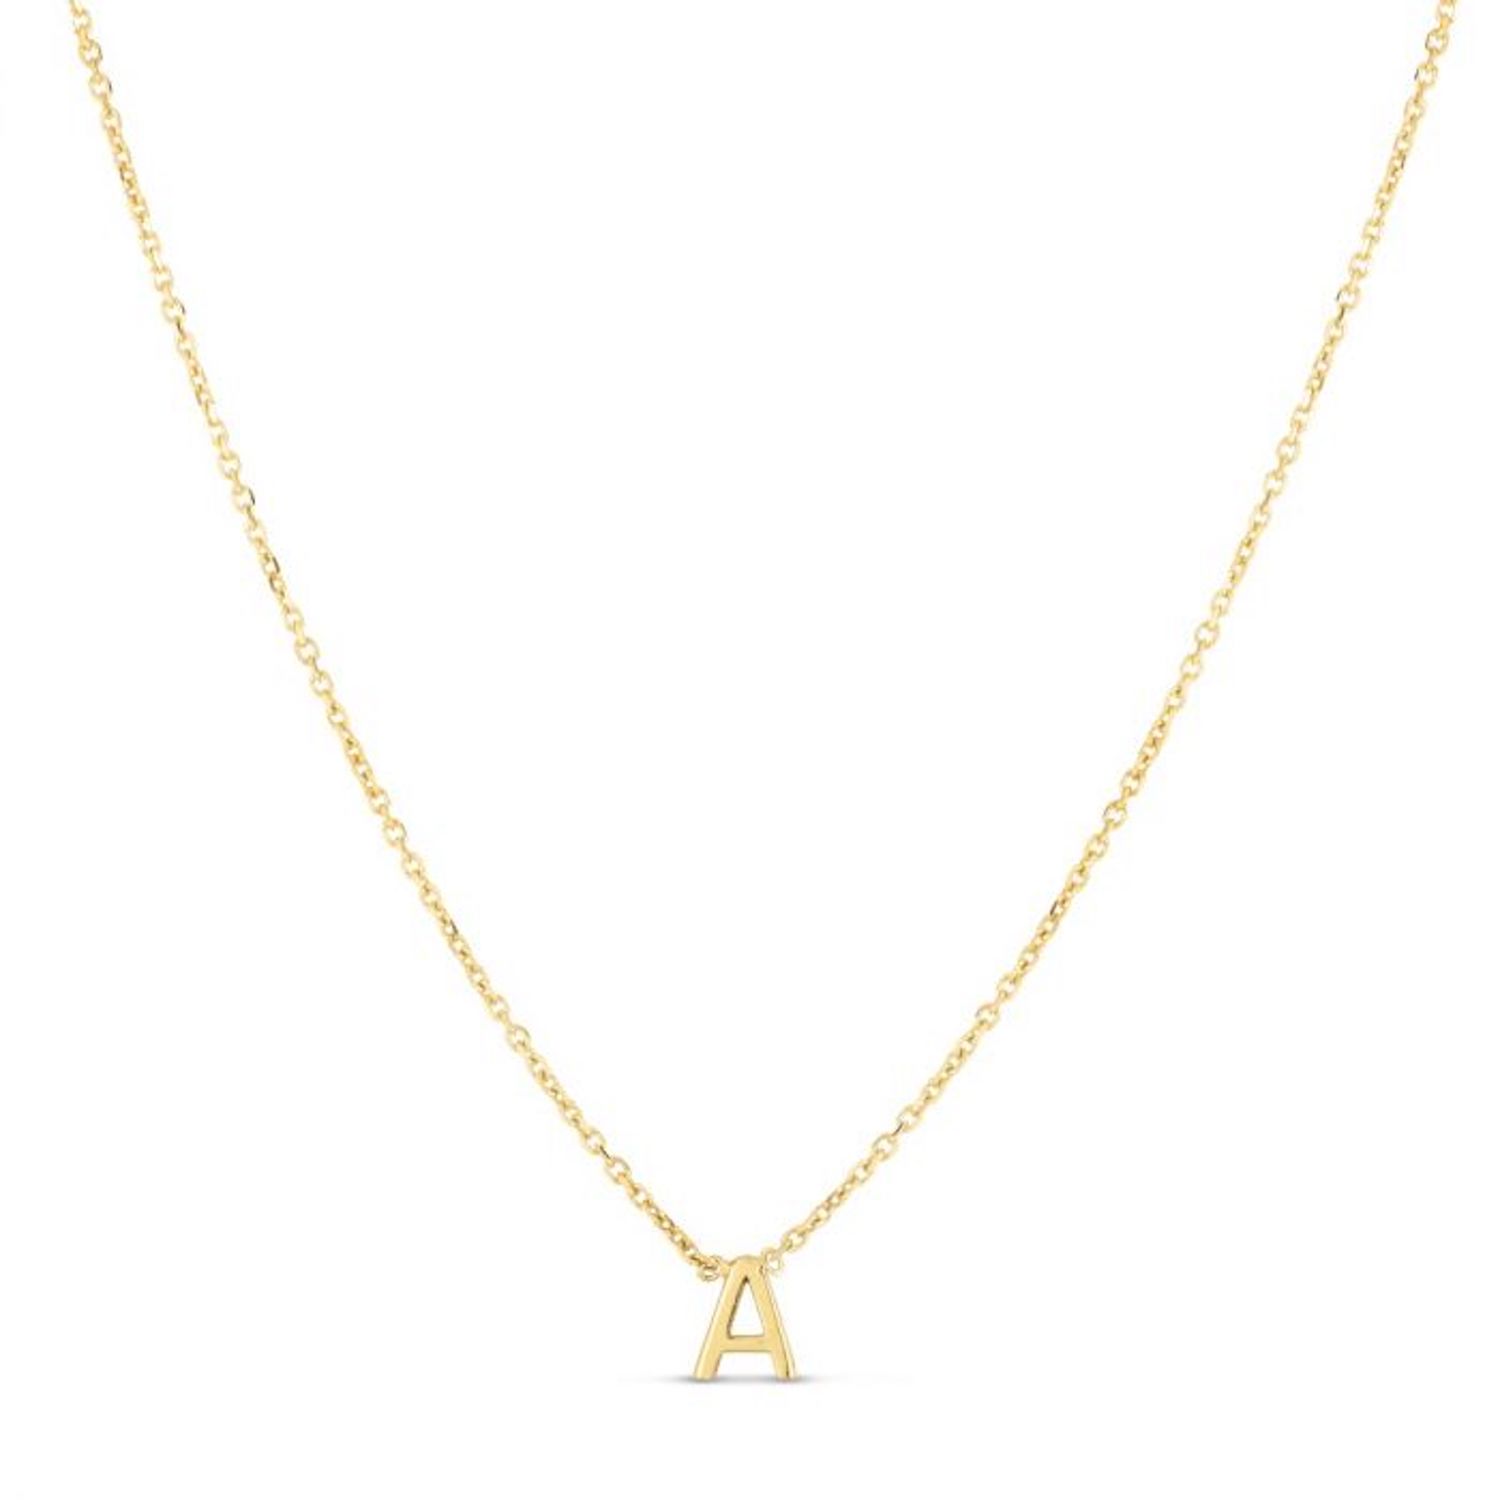 14K Yellow Gold Letter Initials Pendant Necklace 16"-18" - A